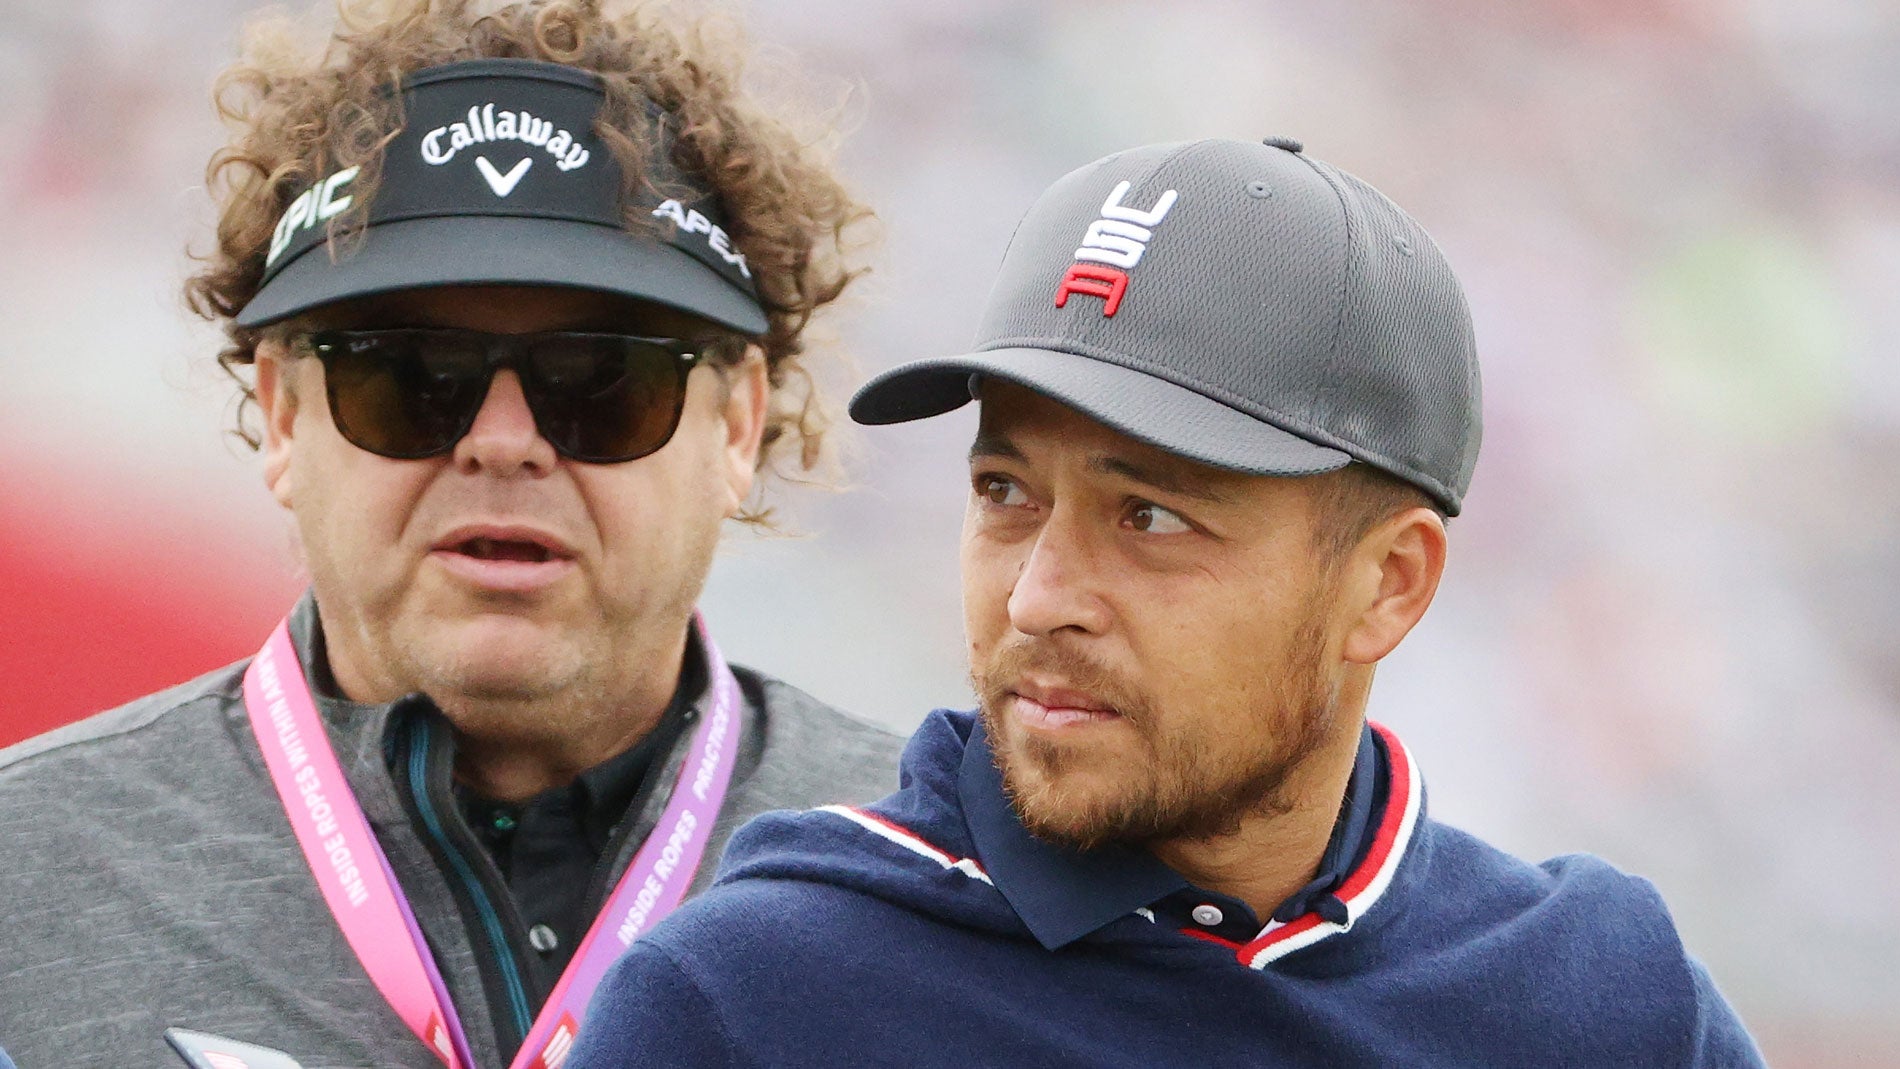 Xander Schauffele of team United States (R) and his father Stefan Schauffele look on prior to the 43rd Ryder Cup at Whistling Straits